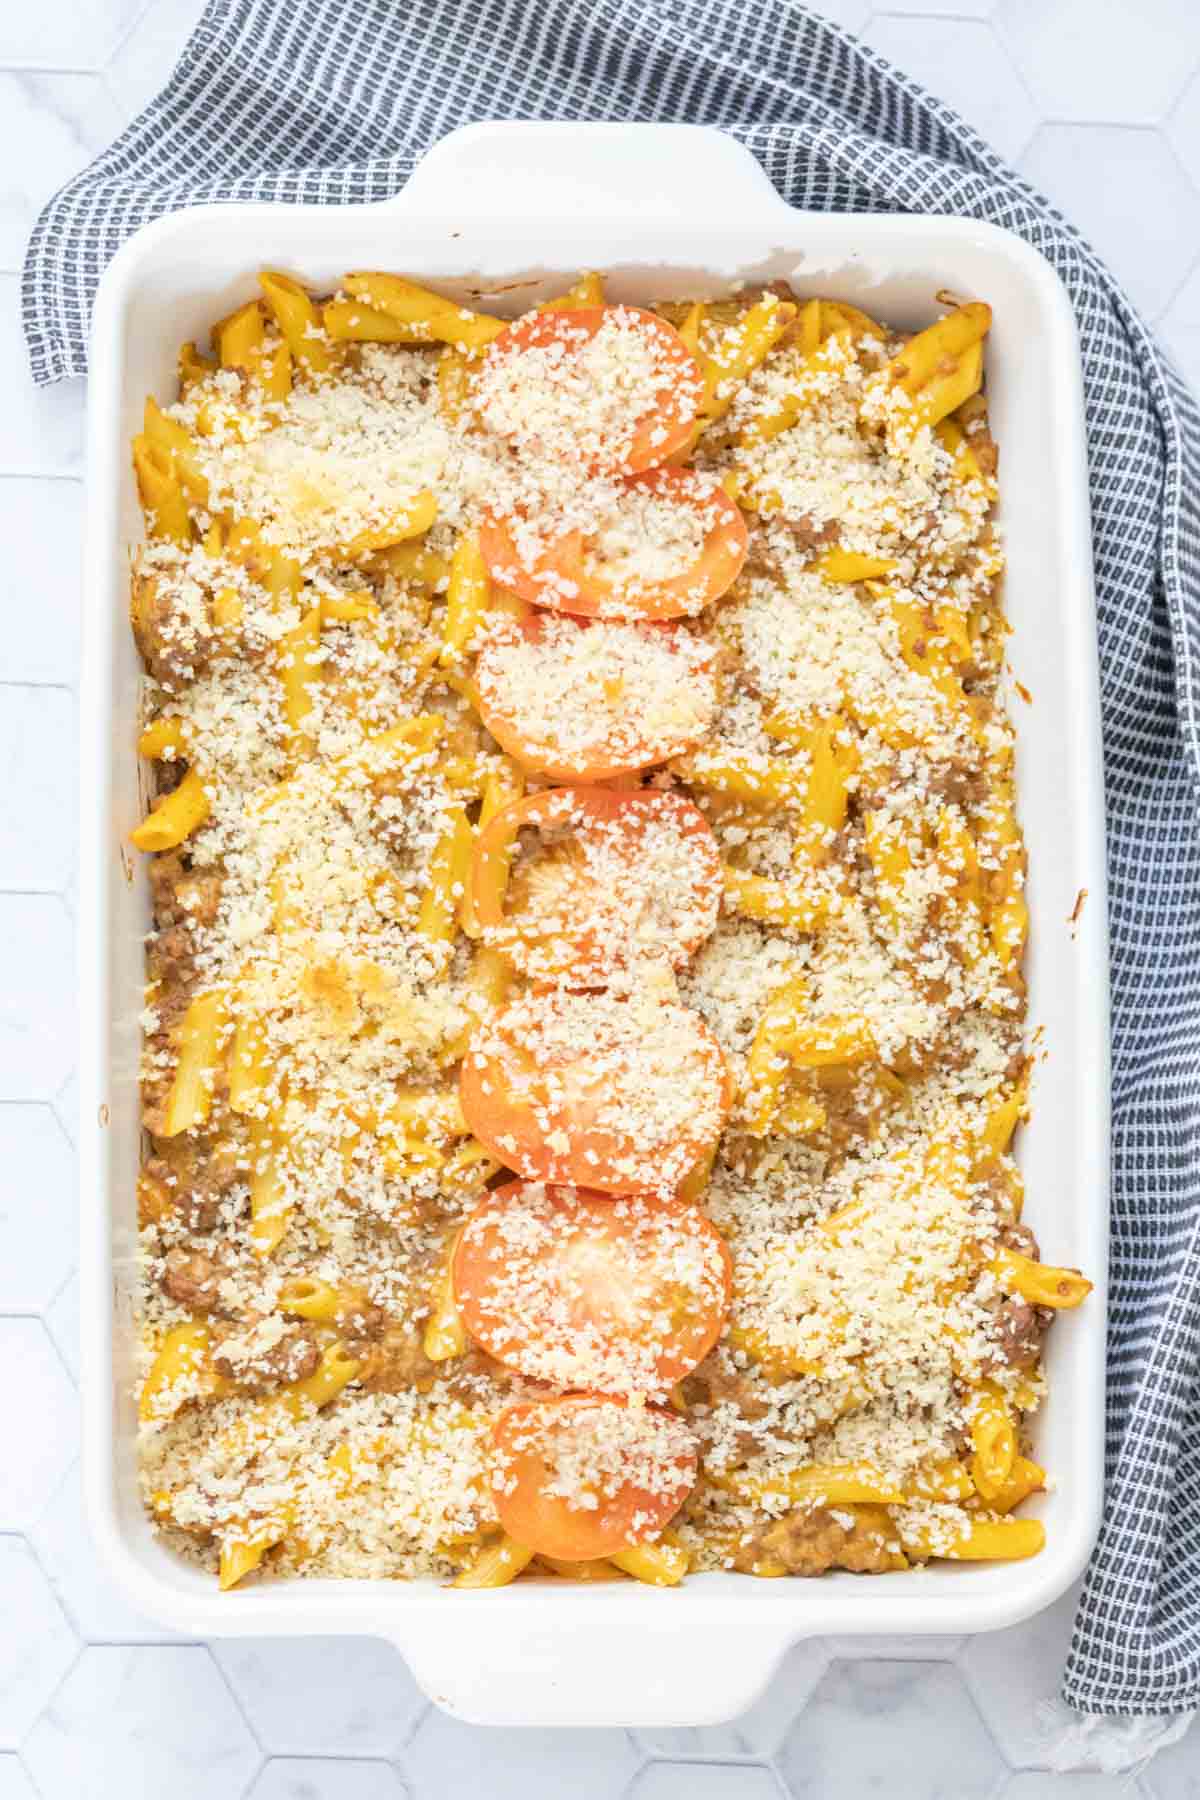 White casserole dish filled with baked cheeseburger mac and cheese.